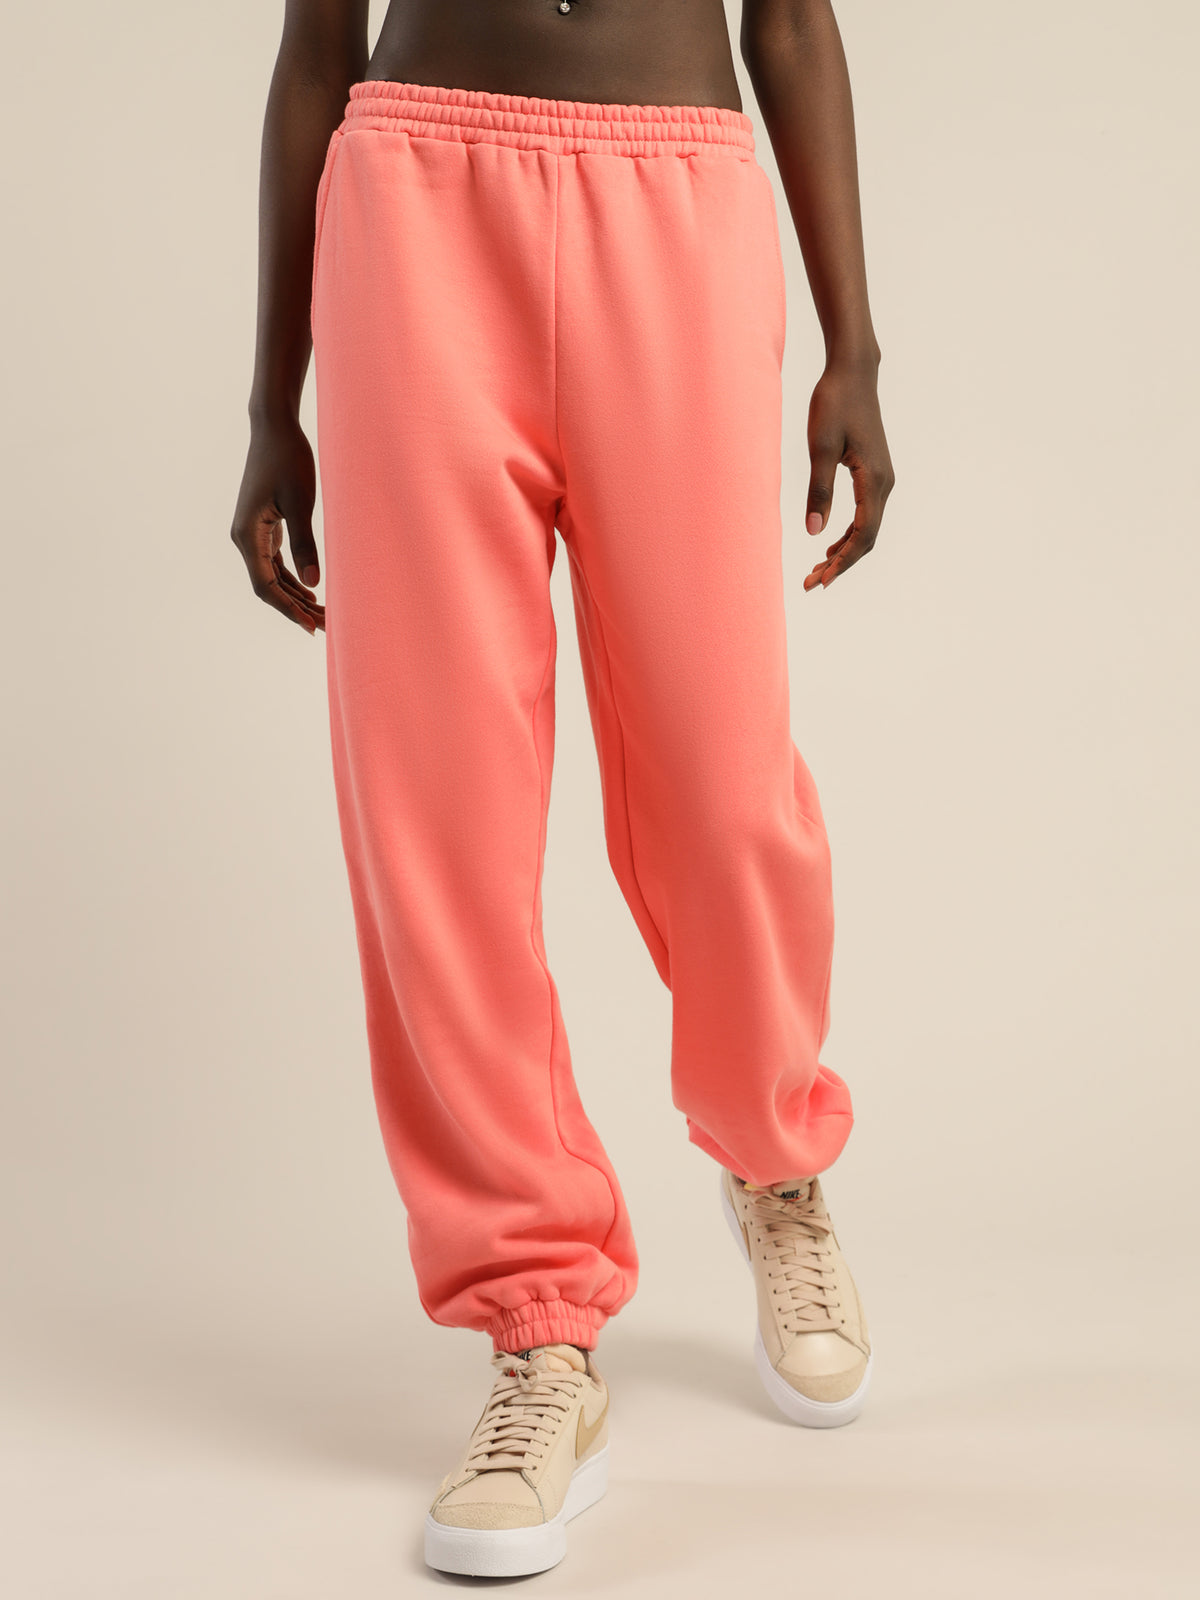 All Around Trackpants in Tropical Pink